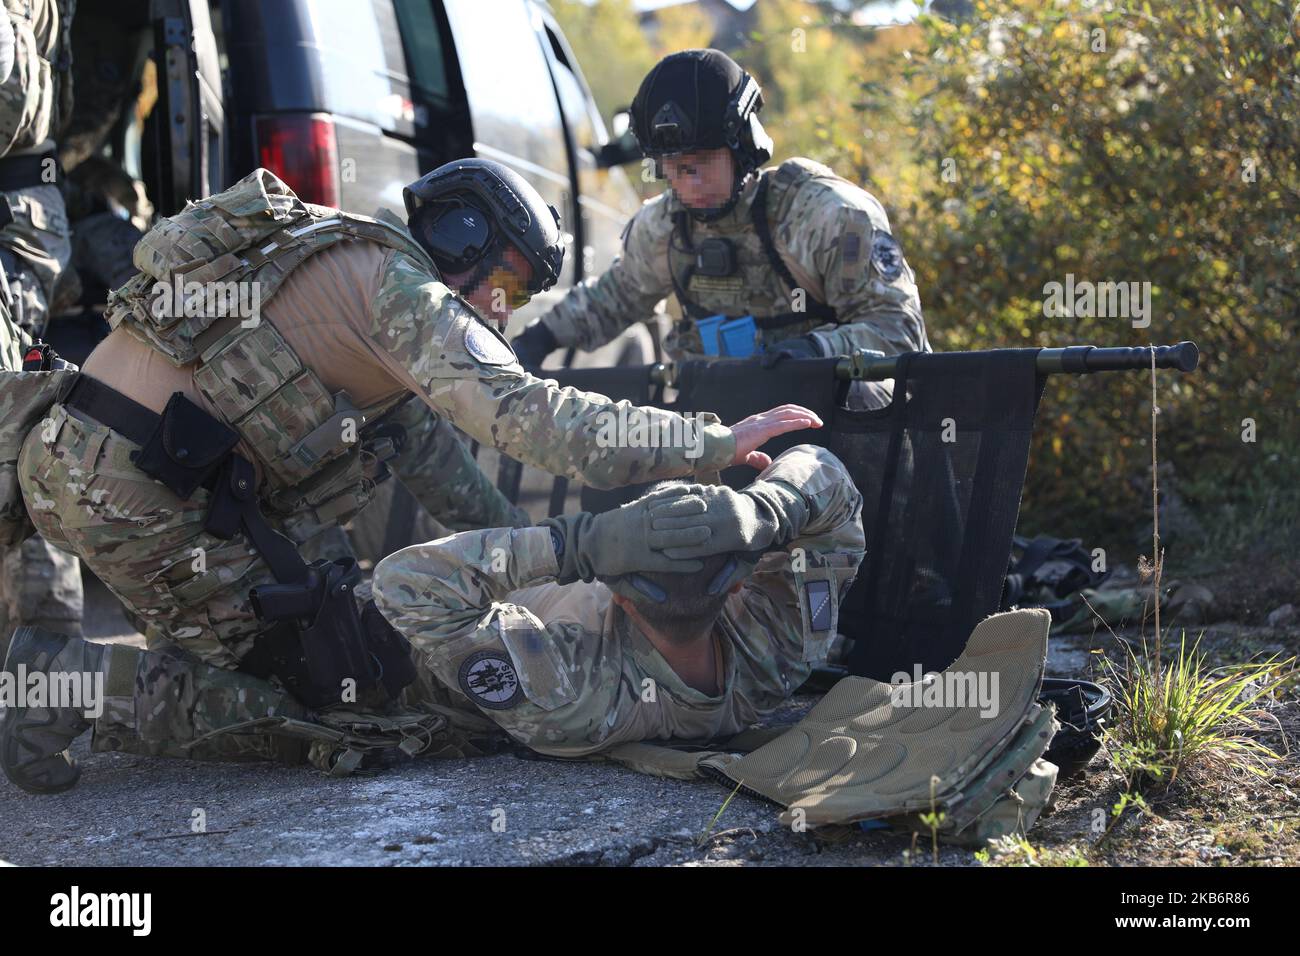 Members of the Special Support Units (SSU) of Bosnia-Herzegovina State Investigation Protection Agency (SIPA) provide medical attention during a bunker raid as part of exercise Brutalist Tornjak in Sarajevo, Bosnia and Herzegovina Oct. 20, 2022 The SIPA SSU and the U.S. Army 10th Special Forces Group (Airborne) trained together with elements of the Armed Forces of Bosnia and Herzegovina in an interagency joint exercise focusing on direct action in close environments to secure high value targets. (U.S. Army photo by Spc. Mercedes Johnson) Stock Photo